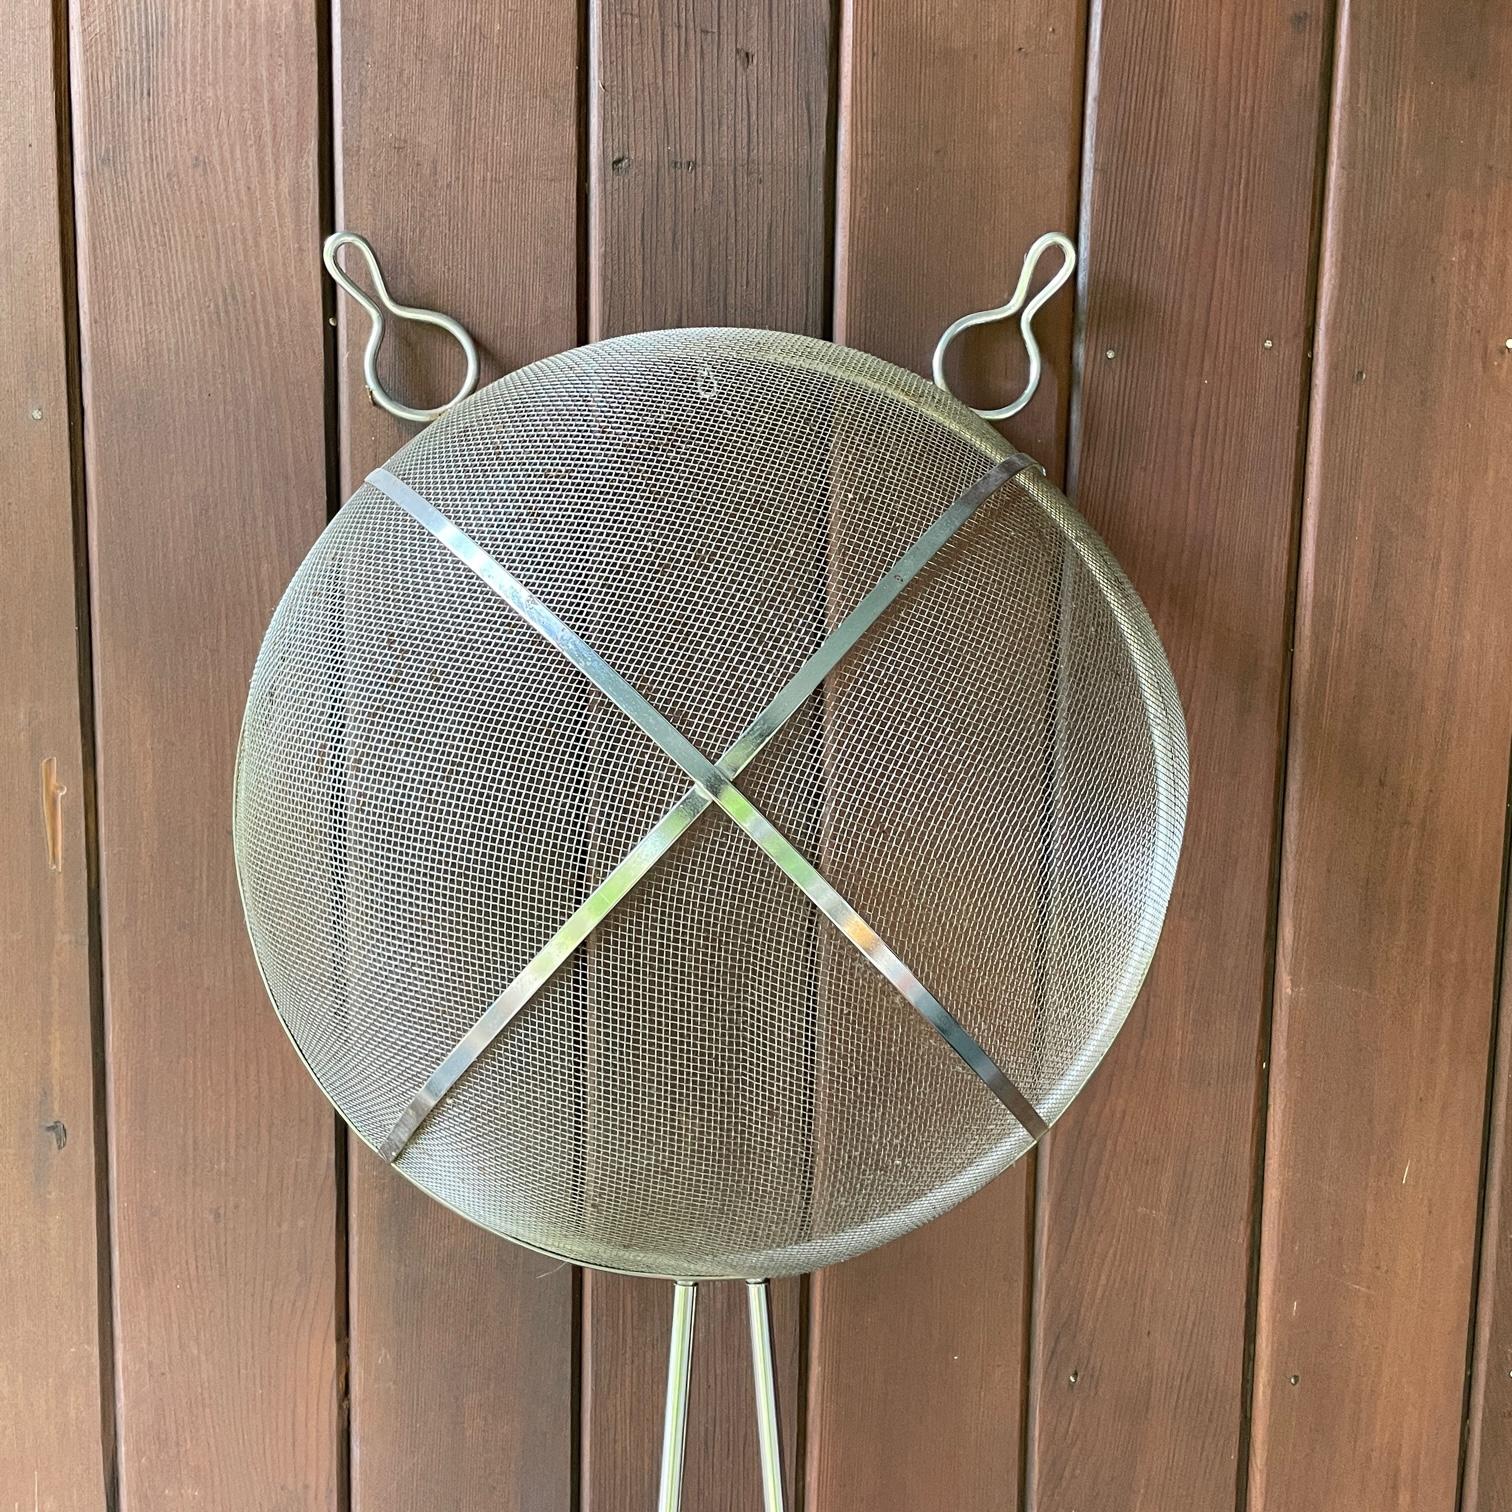 Steel 1960s Giant Strainer Kitchen Sign Wall Art Sculpture Chrome Basket Tool For Sale